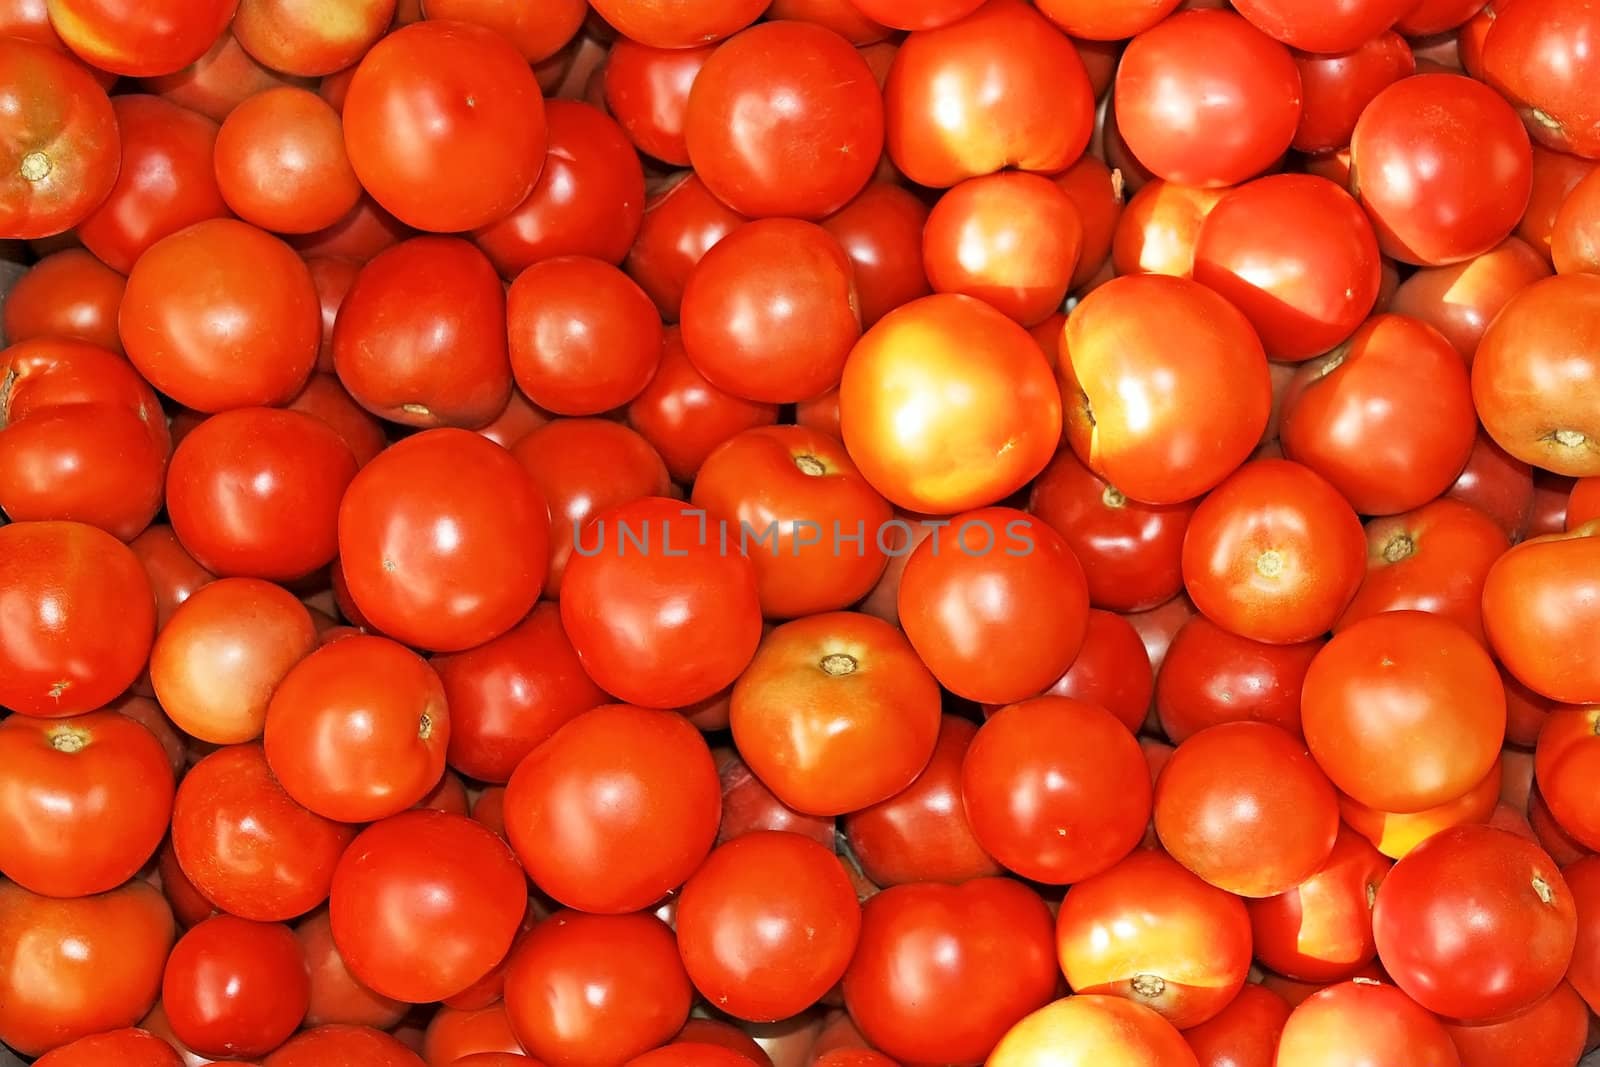 Many ripe red tomatoes on the heap as a background